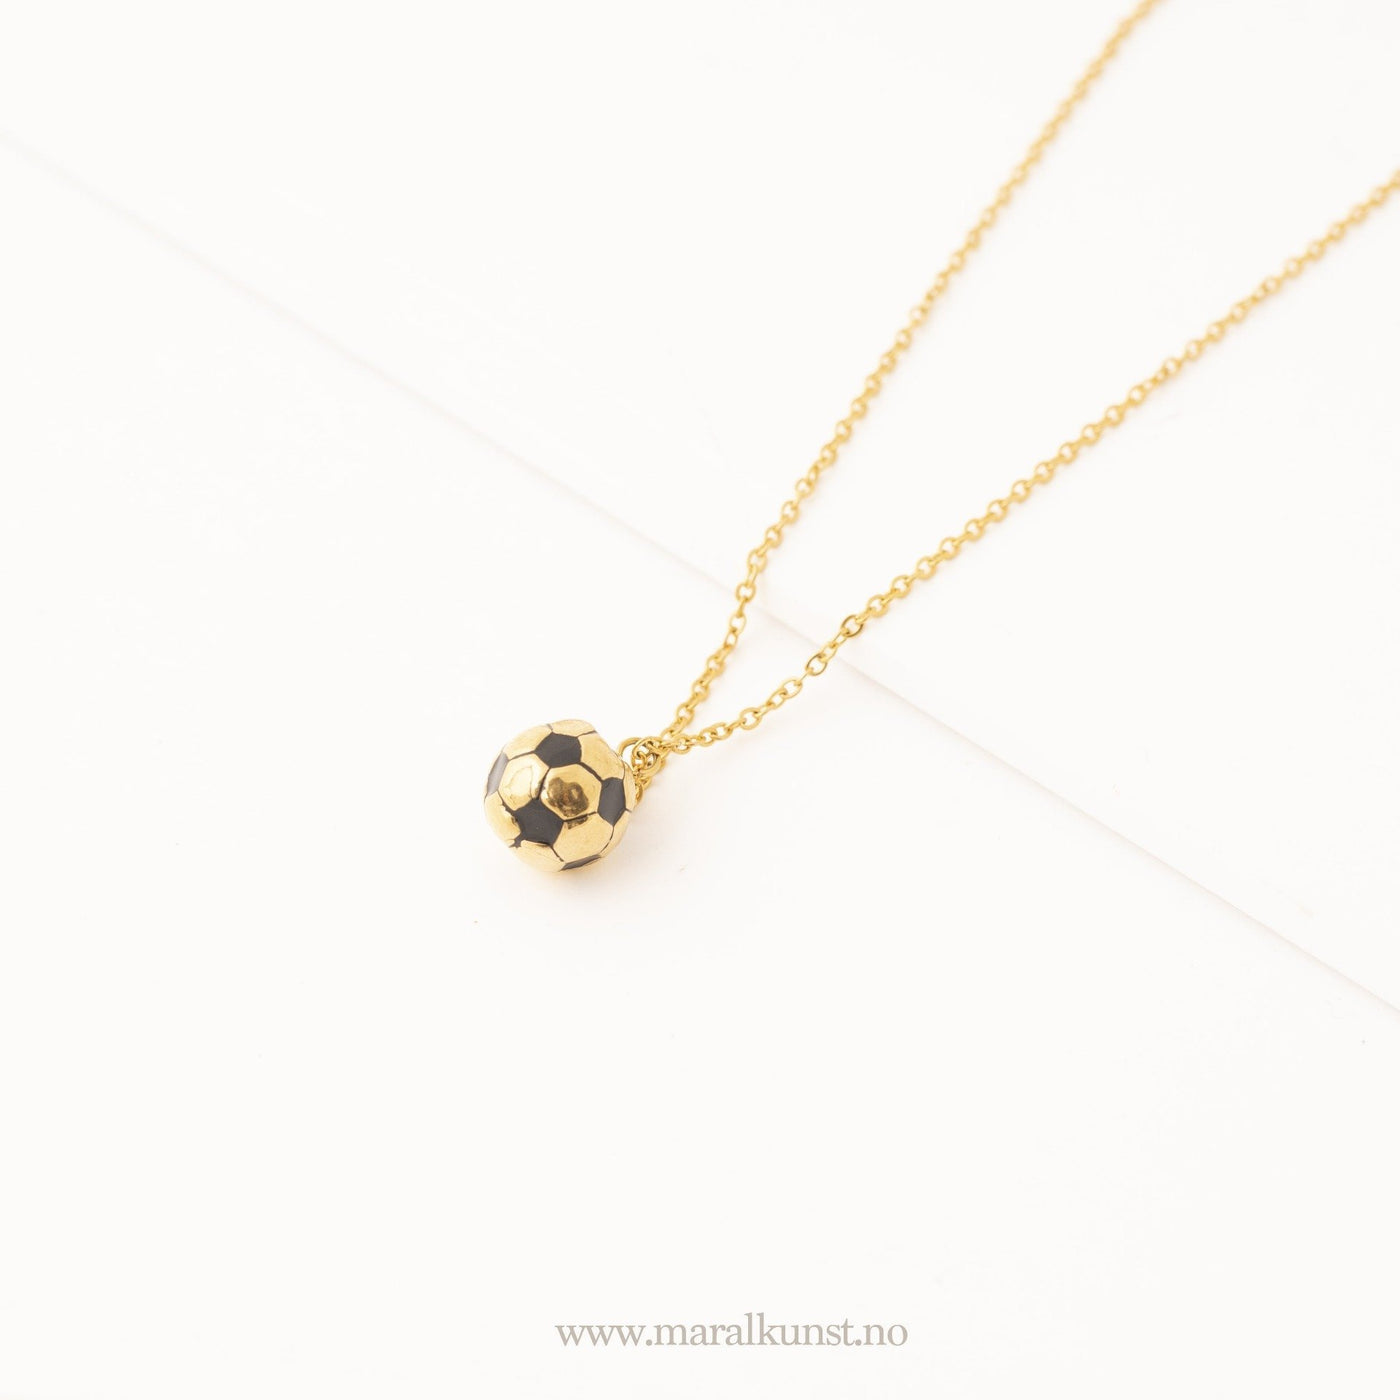 Golden Football Ball Necklace - Maral Kunst Jewelry